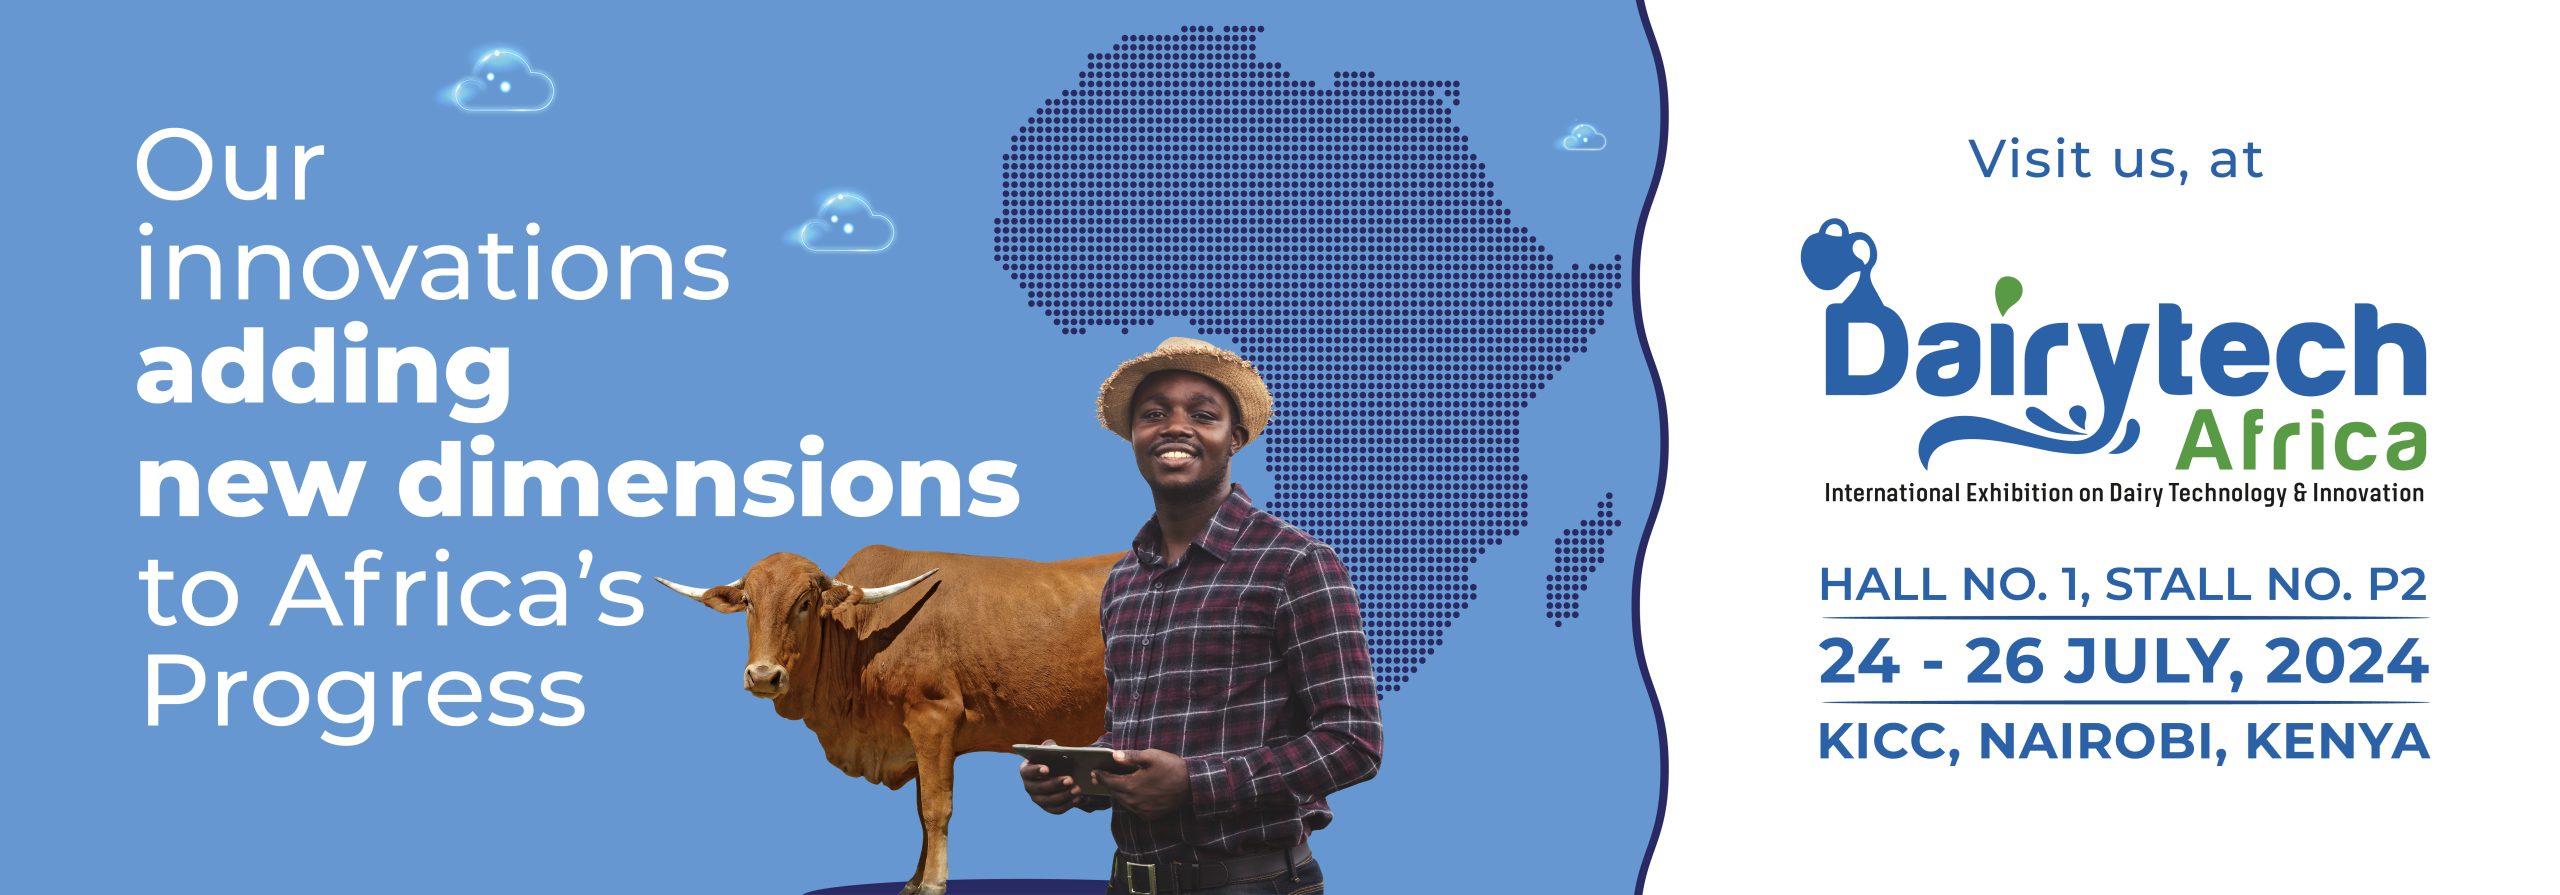 Dairytech Africa participation banner by Prompt Dairy Tech